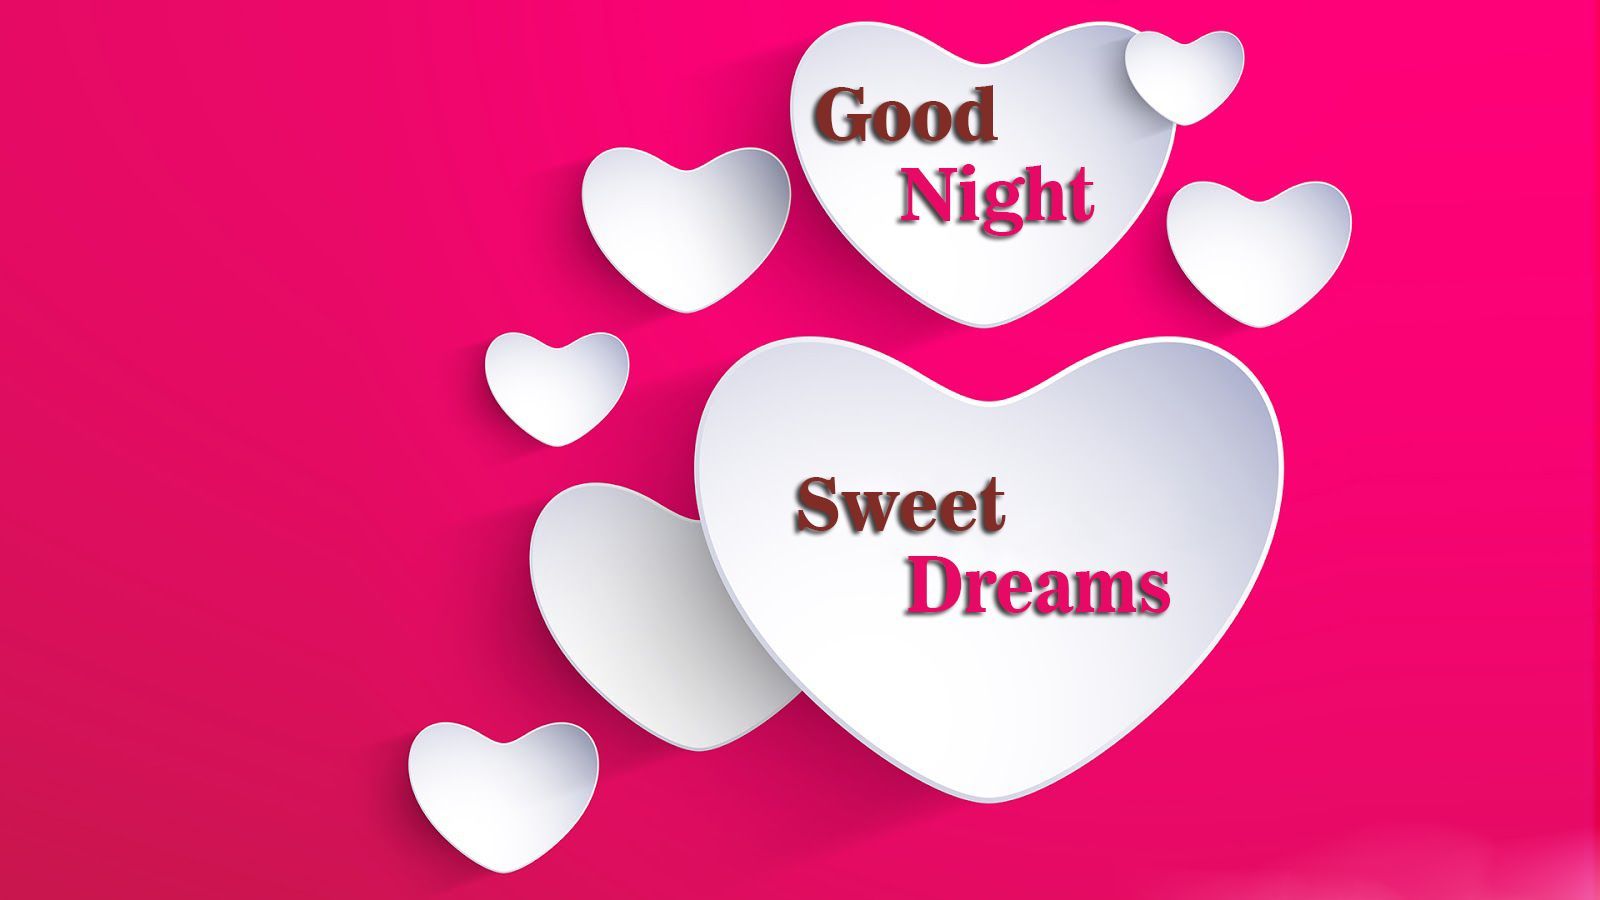 Good Night Heart Images Wallpapers